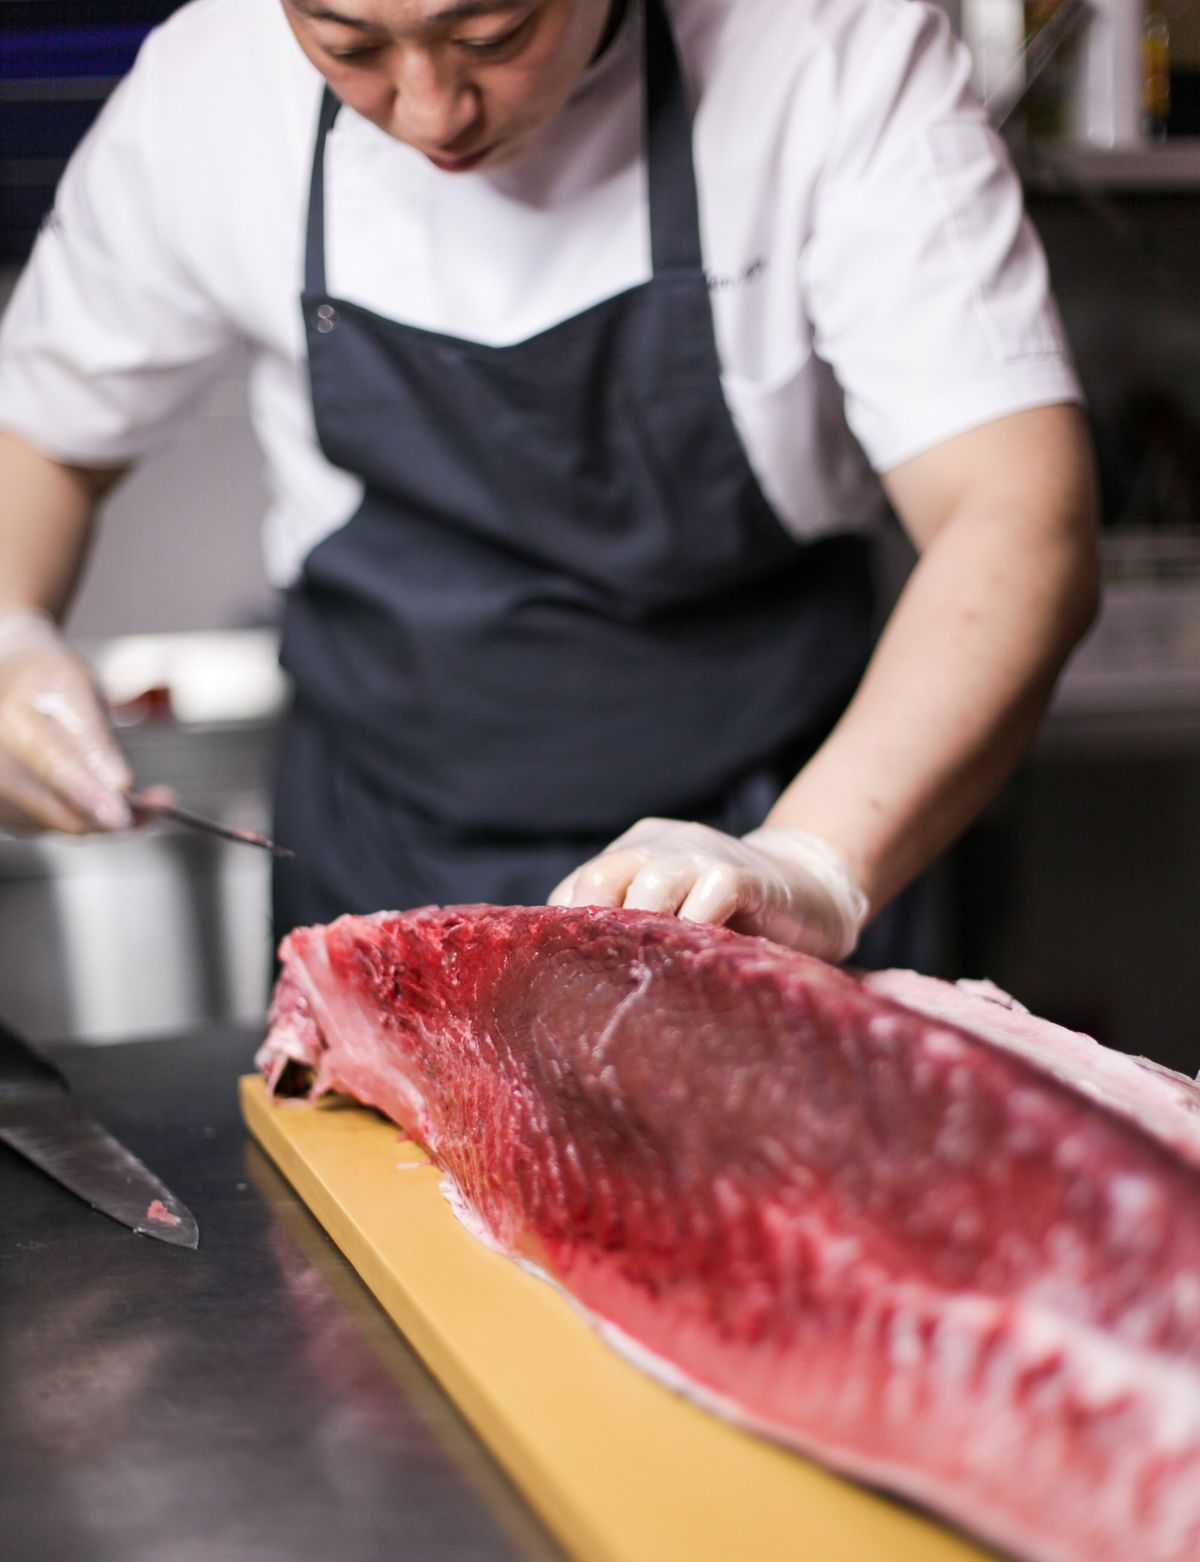 What Are The Most Expensive Cuts of Bluefin Tuna?